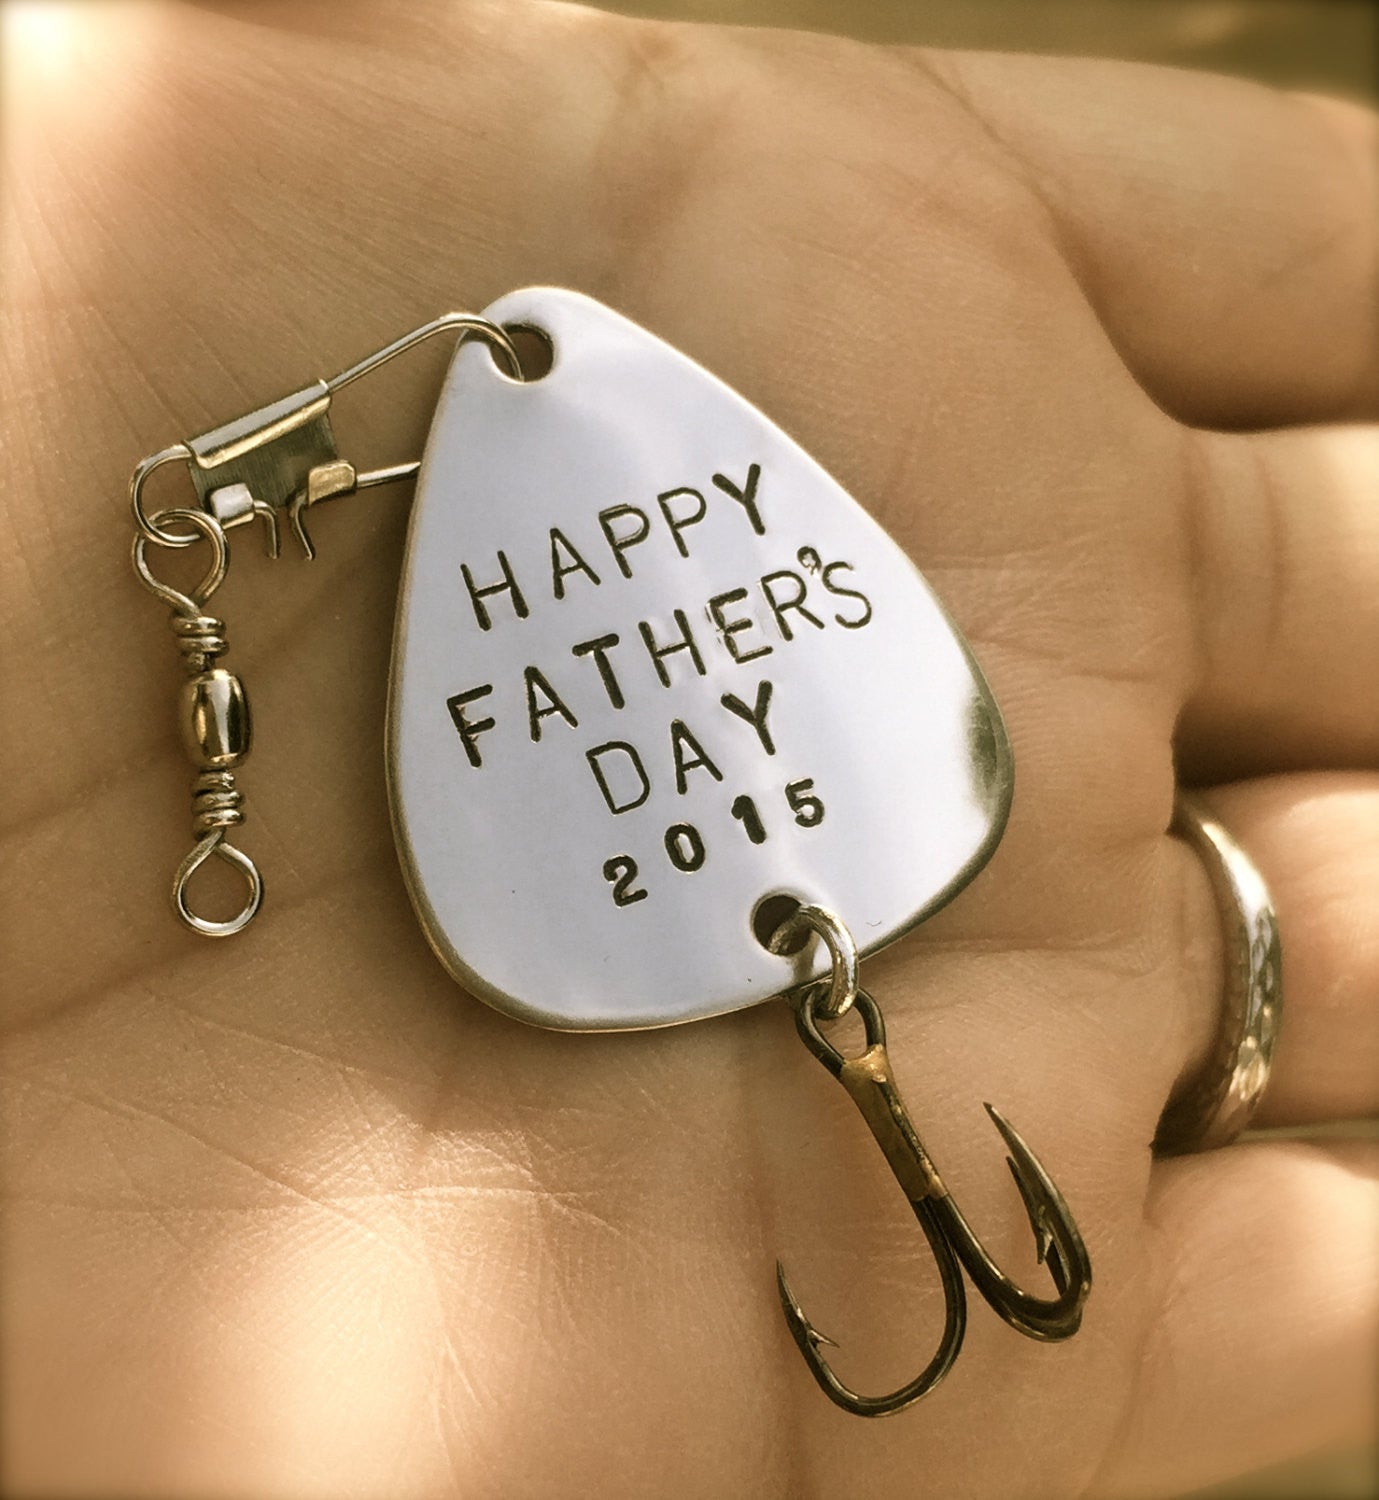 Fishing Lure, Daddys New Fishing Buddy Lure, Boyfriend Gift, Personalized Fishing Lure, natashaaloha, Boyfriend Gift, Valentine Men - Natashaaloha, jewelry, bracelets, necklace, keychains, fishing lures, gifts for men, charms, personalized, 